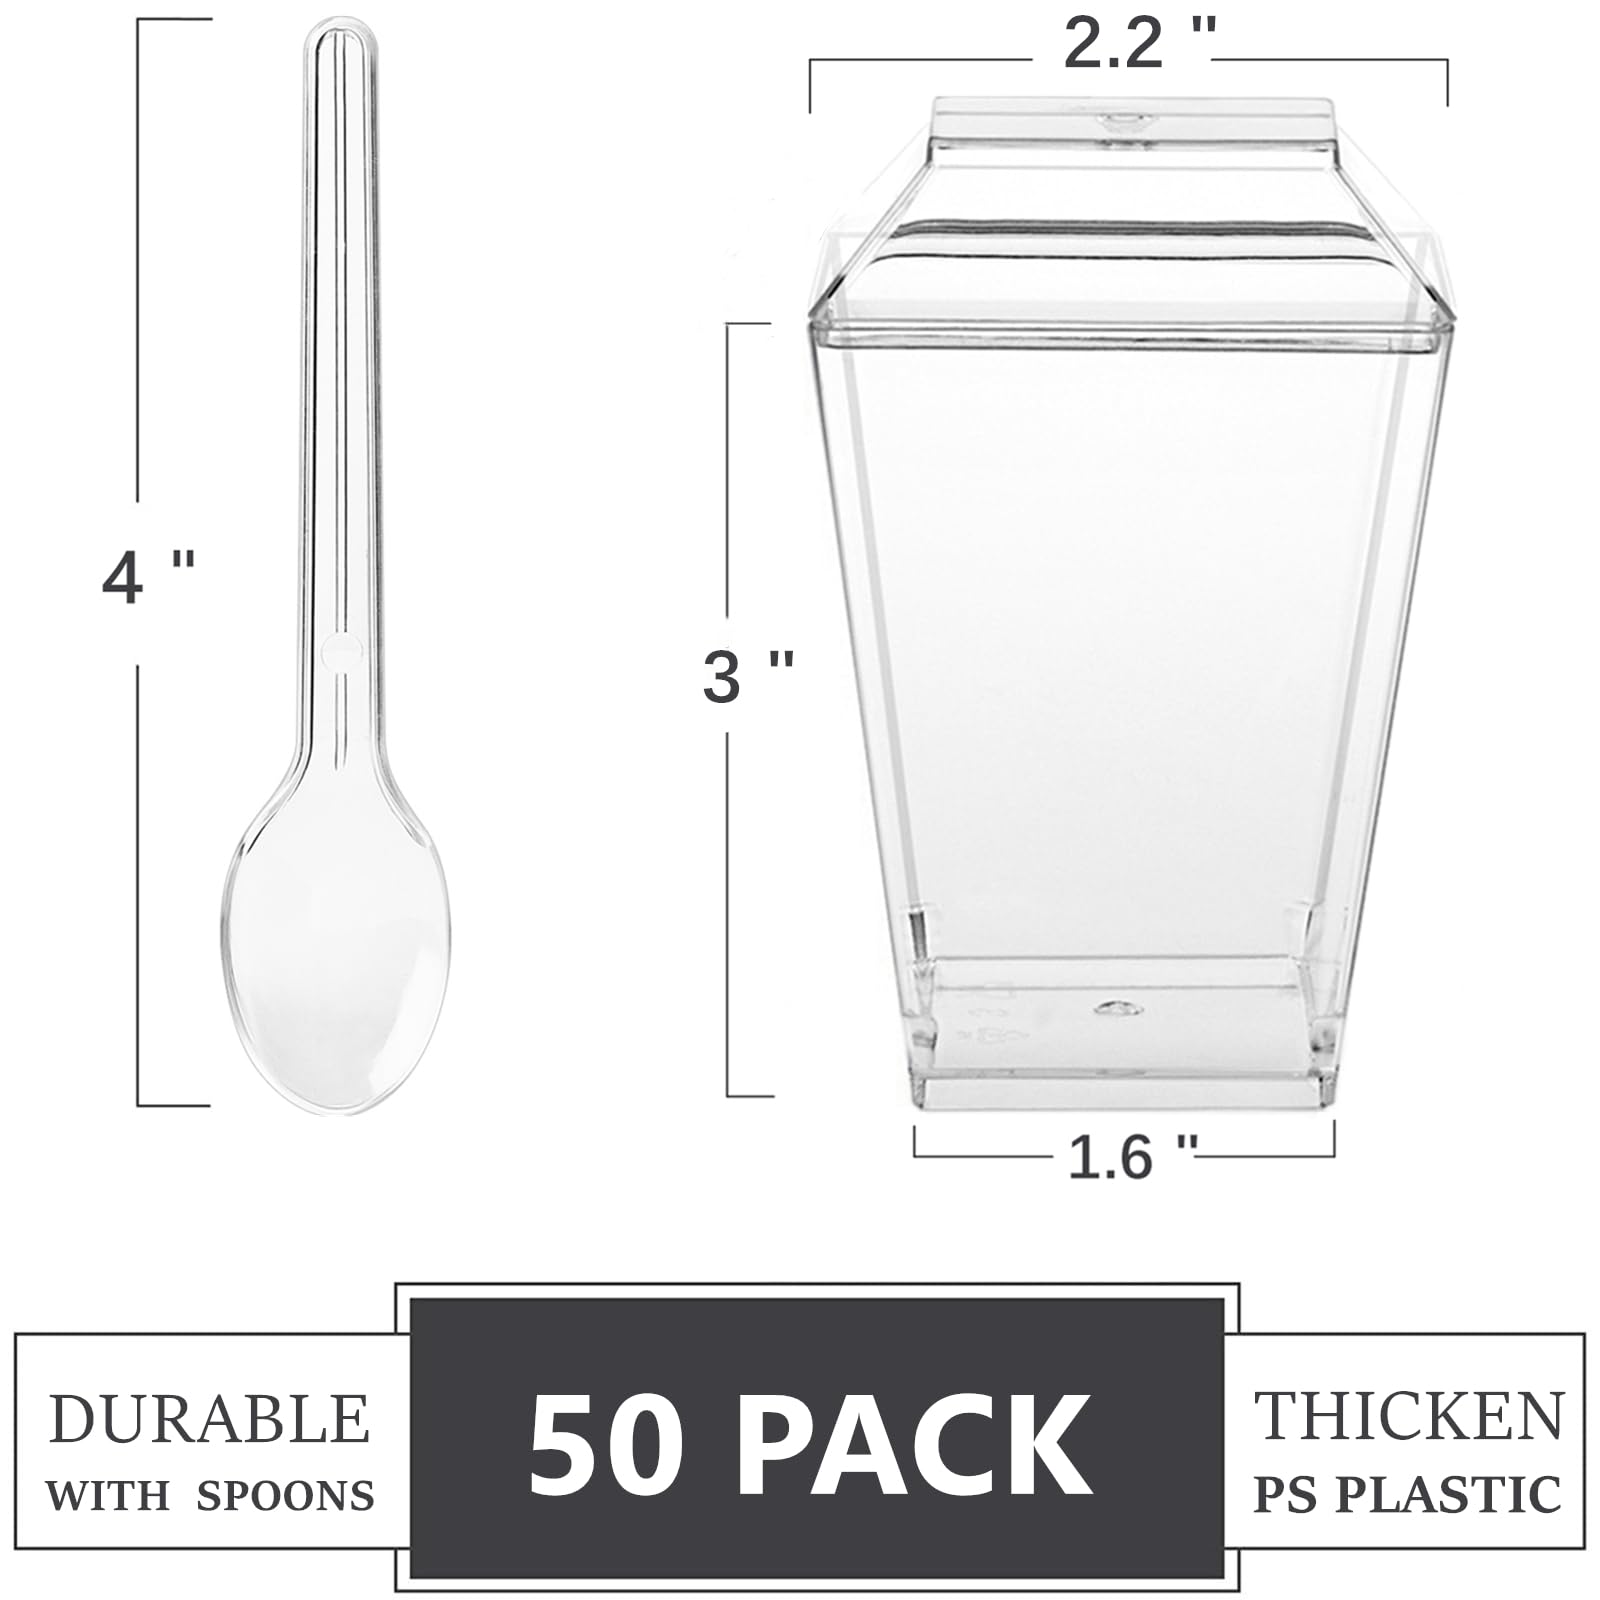 TOFLEN 50 Pack 5 oz Dessert Cups with Lids and Spoons, Mini Clear Square Plastic Dessert Cake Shooter Cups for Party, Yogurt Parfait, Appetizers, Fruits and Puddings